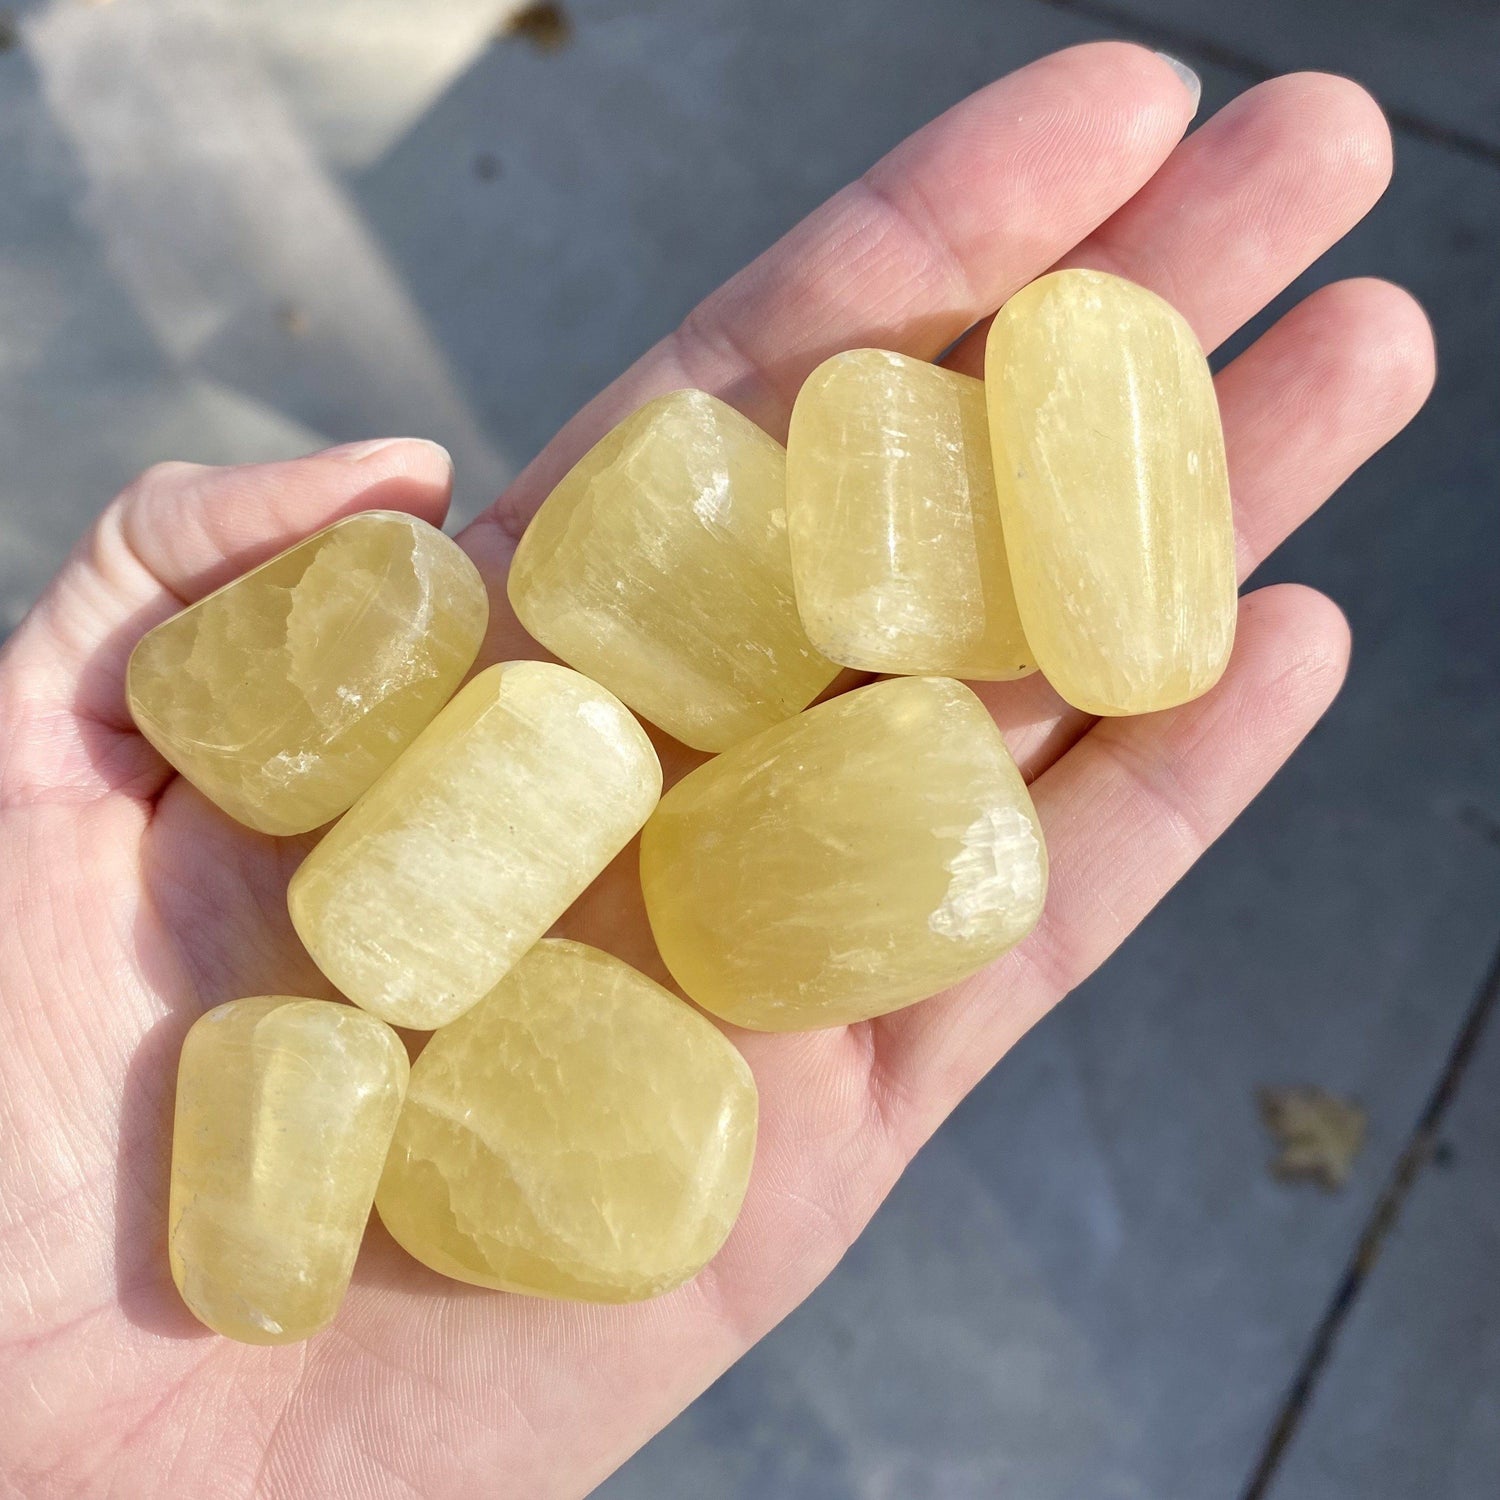 Lemon Yellow Calcite Pocket/Palm Stone Crystal Crystals Amazing Crystals- Etsy SMALL: 15-30 GRAMS 